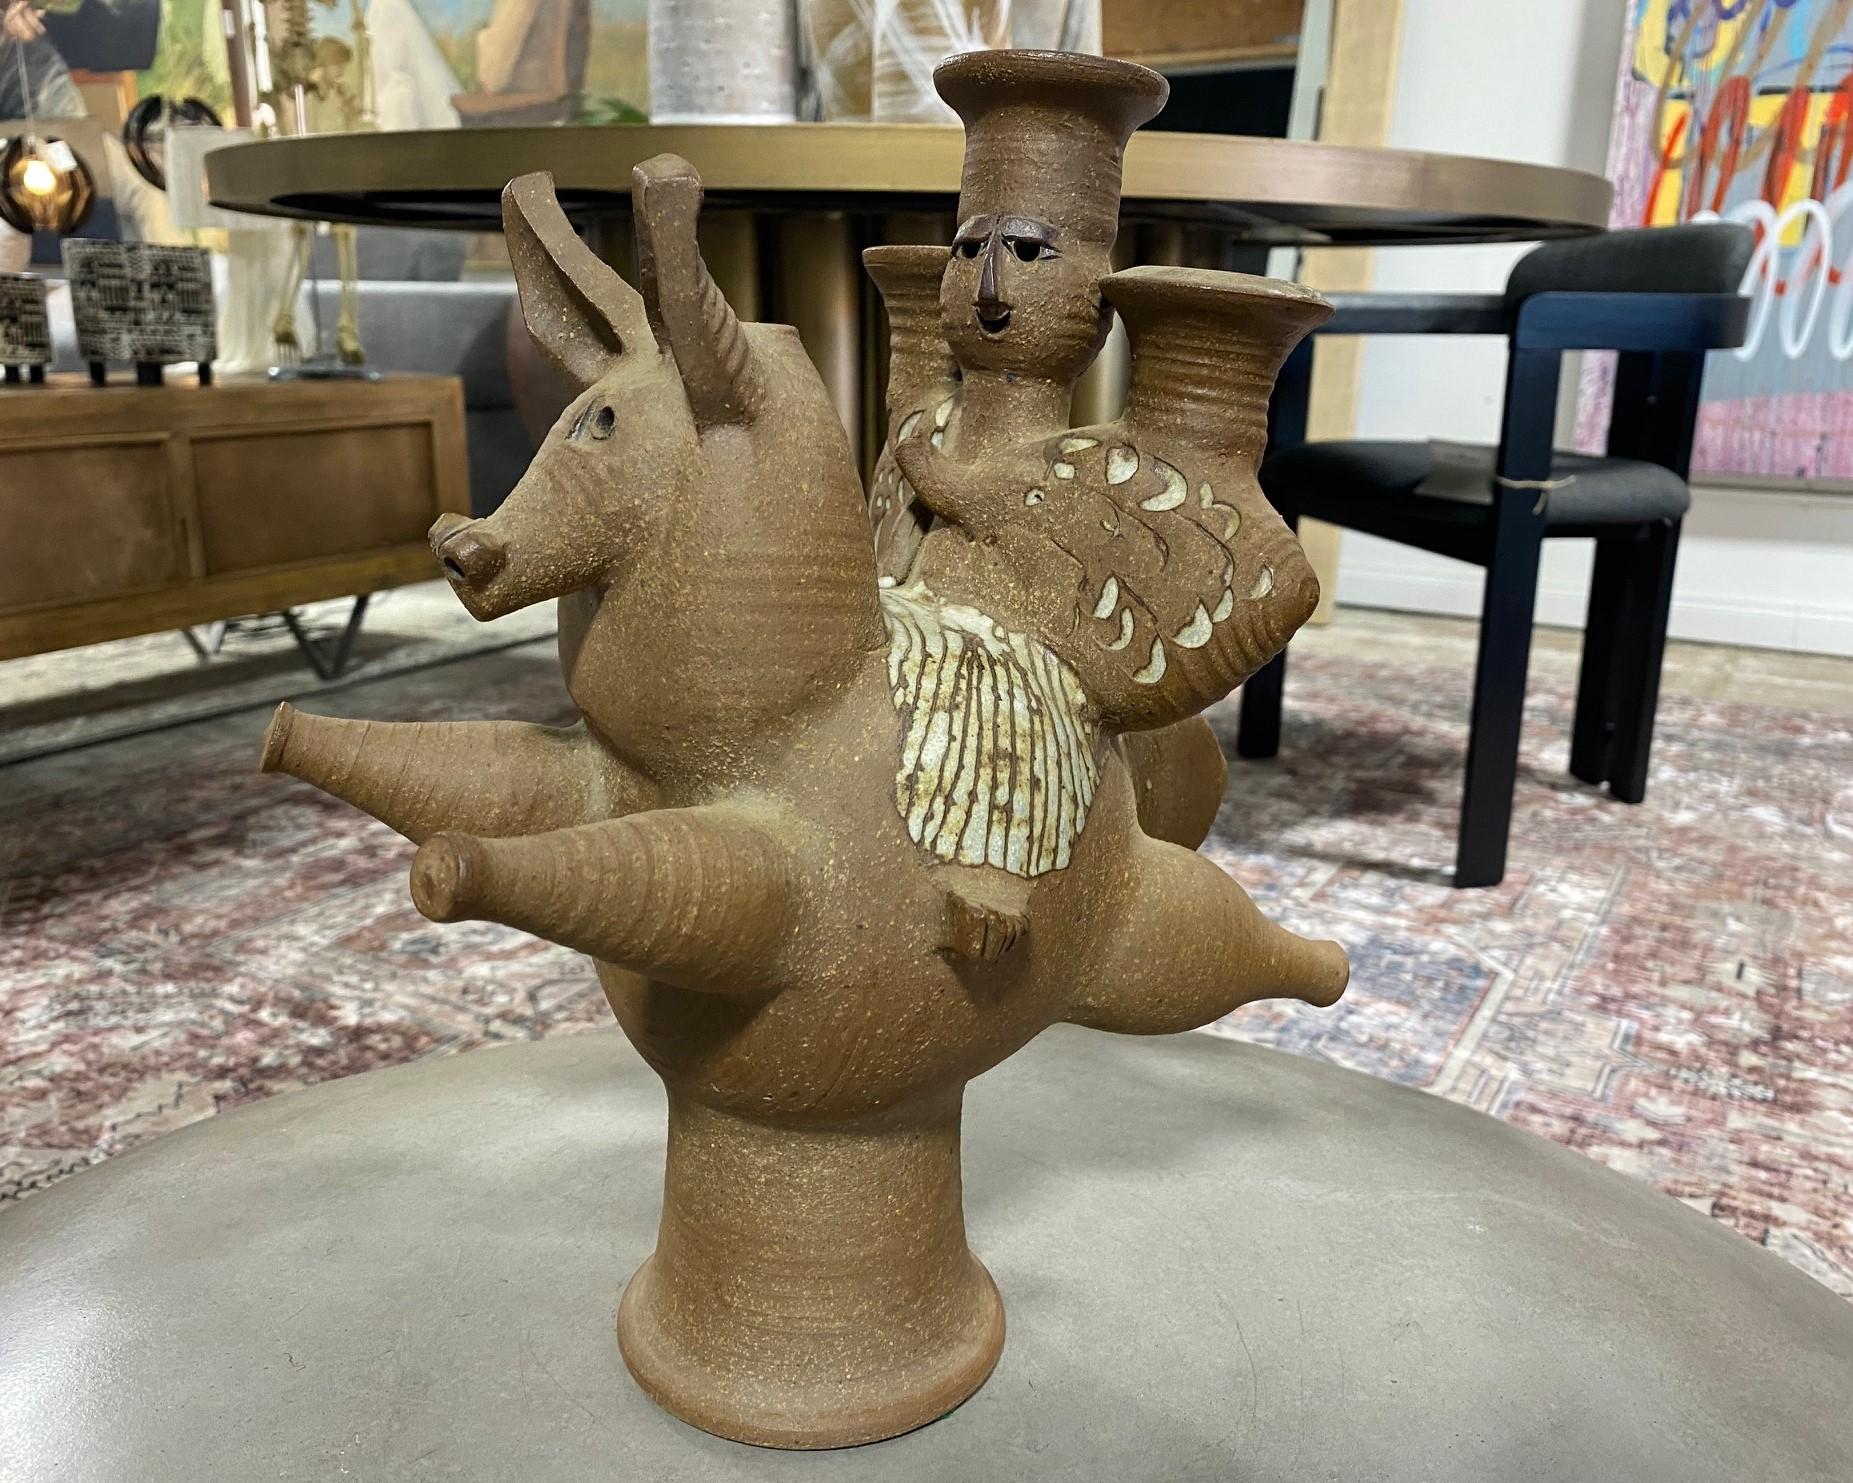 A fabulous, rare, and unique large horse and rider sculpture/ candelabra by famed Mexican American California studio art potter Dora De Larios. It was recently brought to our attention by a collector of her work that this piece was featured in a